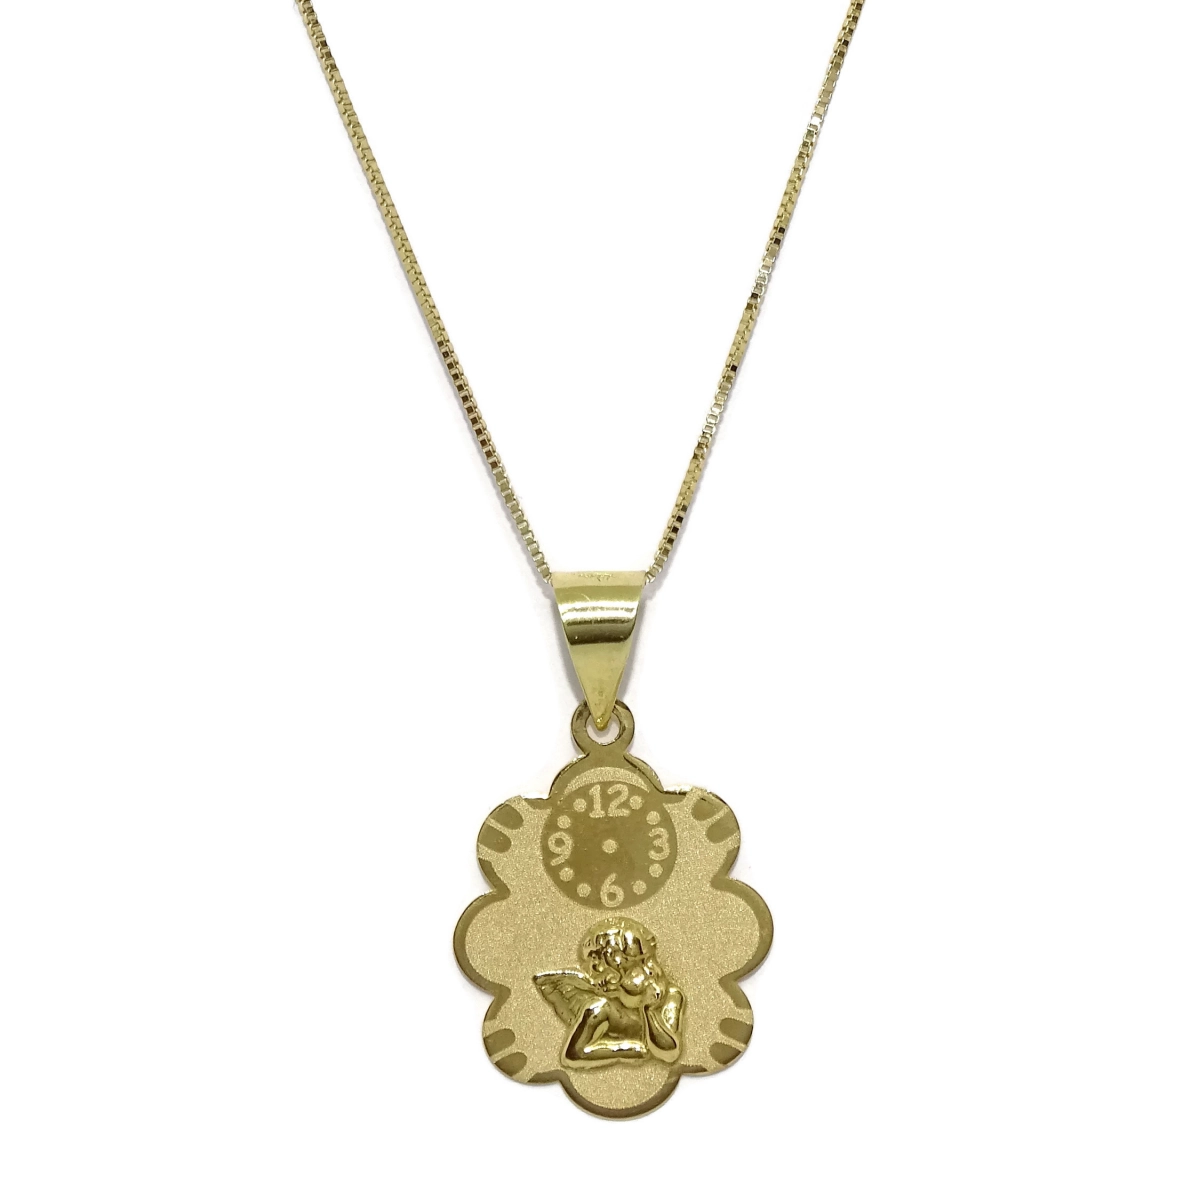 PENDANT FOR BABY� OF 18K YELLOW GOLD WITH A CLOUD, WATCH, AND ANGEL WITH A CHAIN OF VENETIAN GOLD AM NEVER SAY NEVER